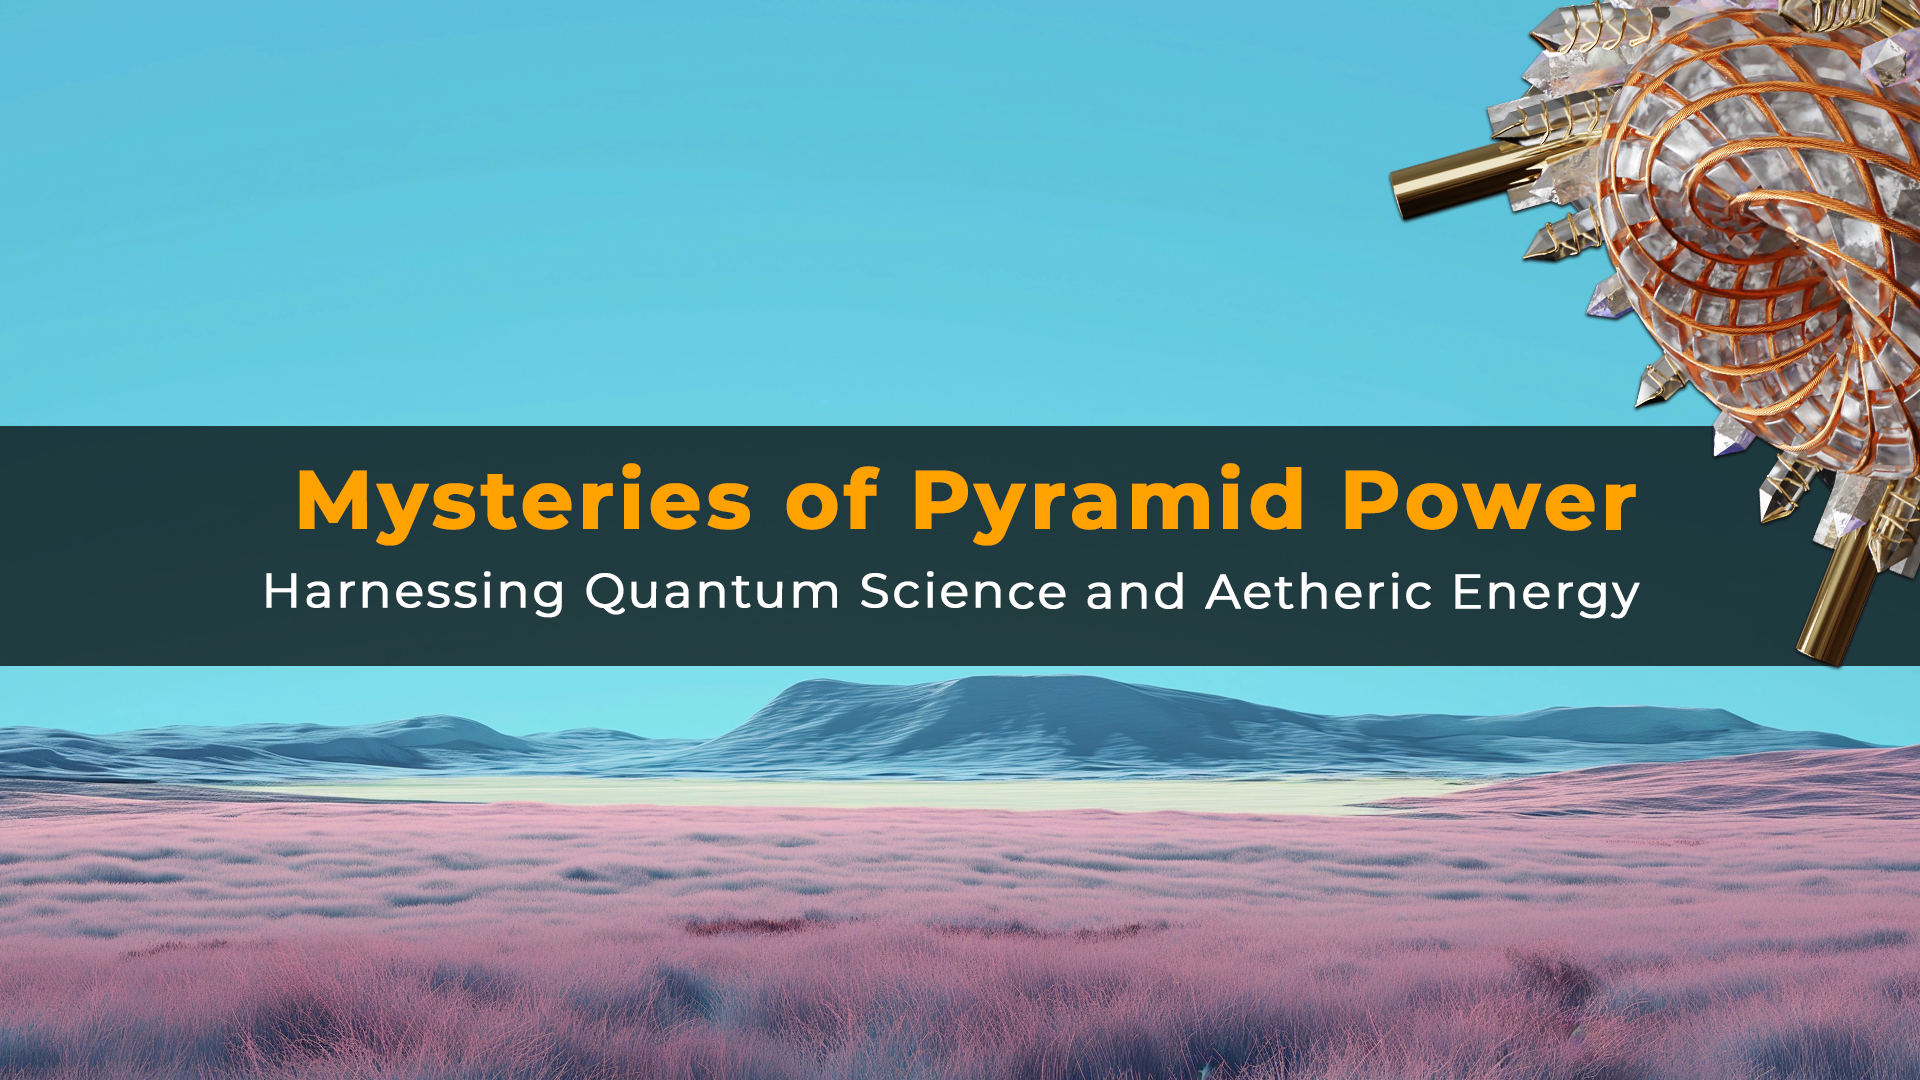 Mysteries of Pyramid Power: Harnessing Quantum Science and Aetheric Energy